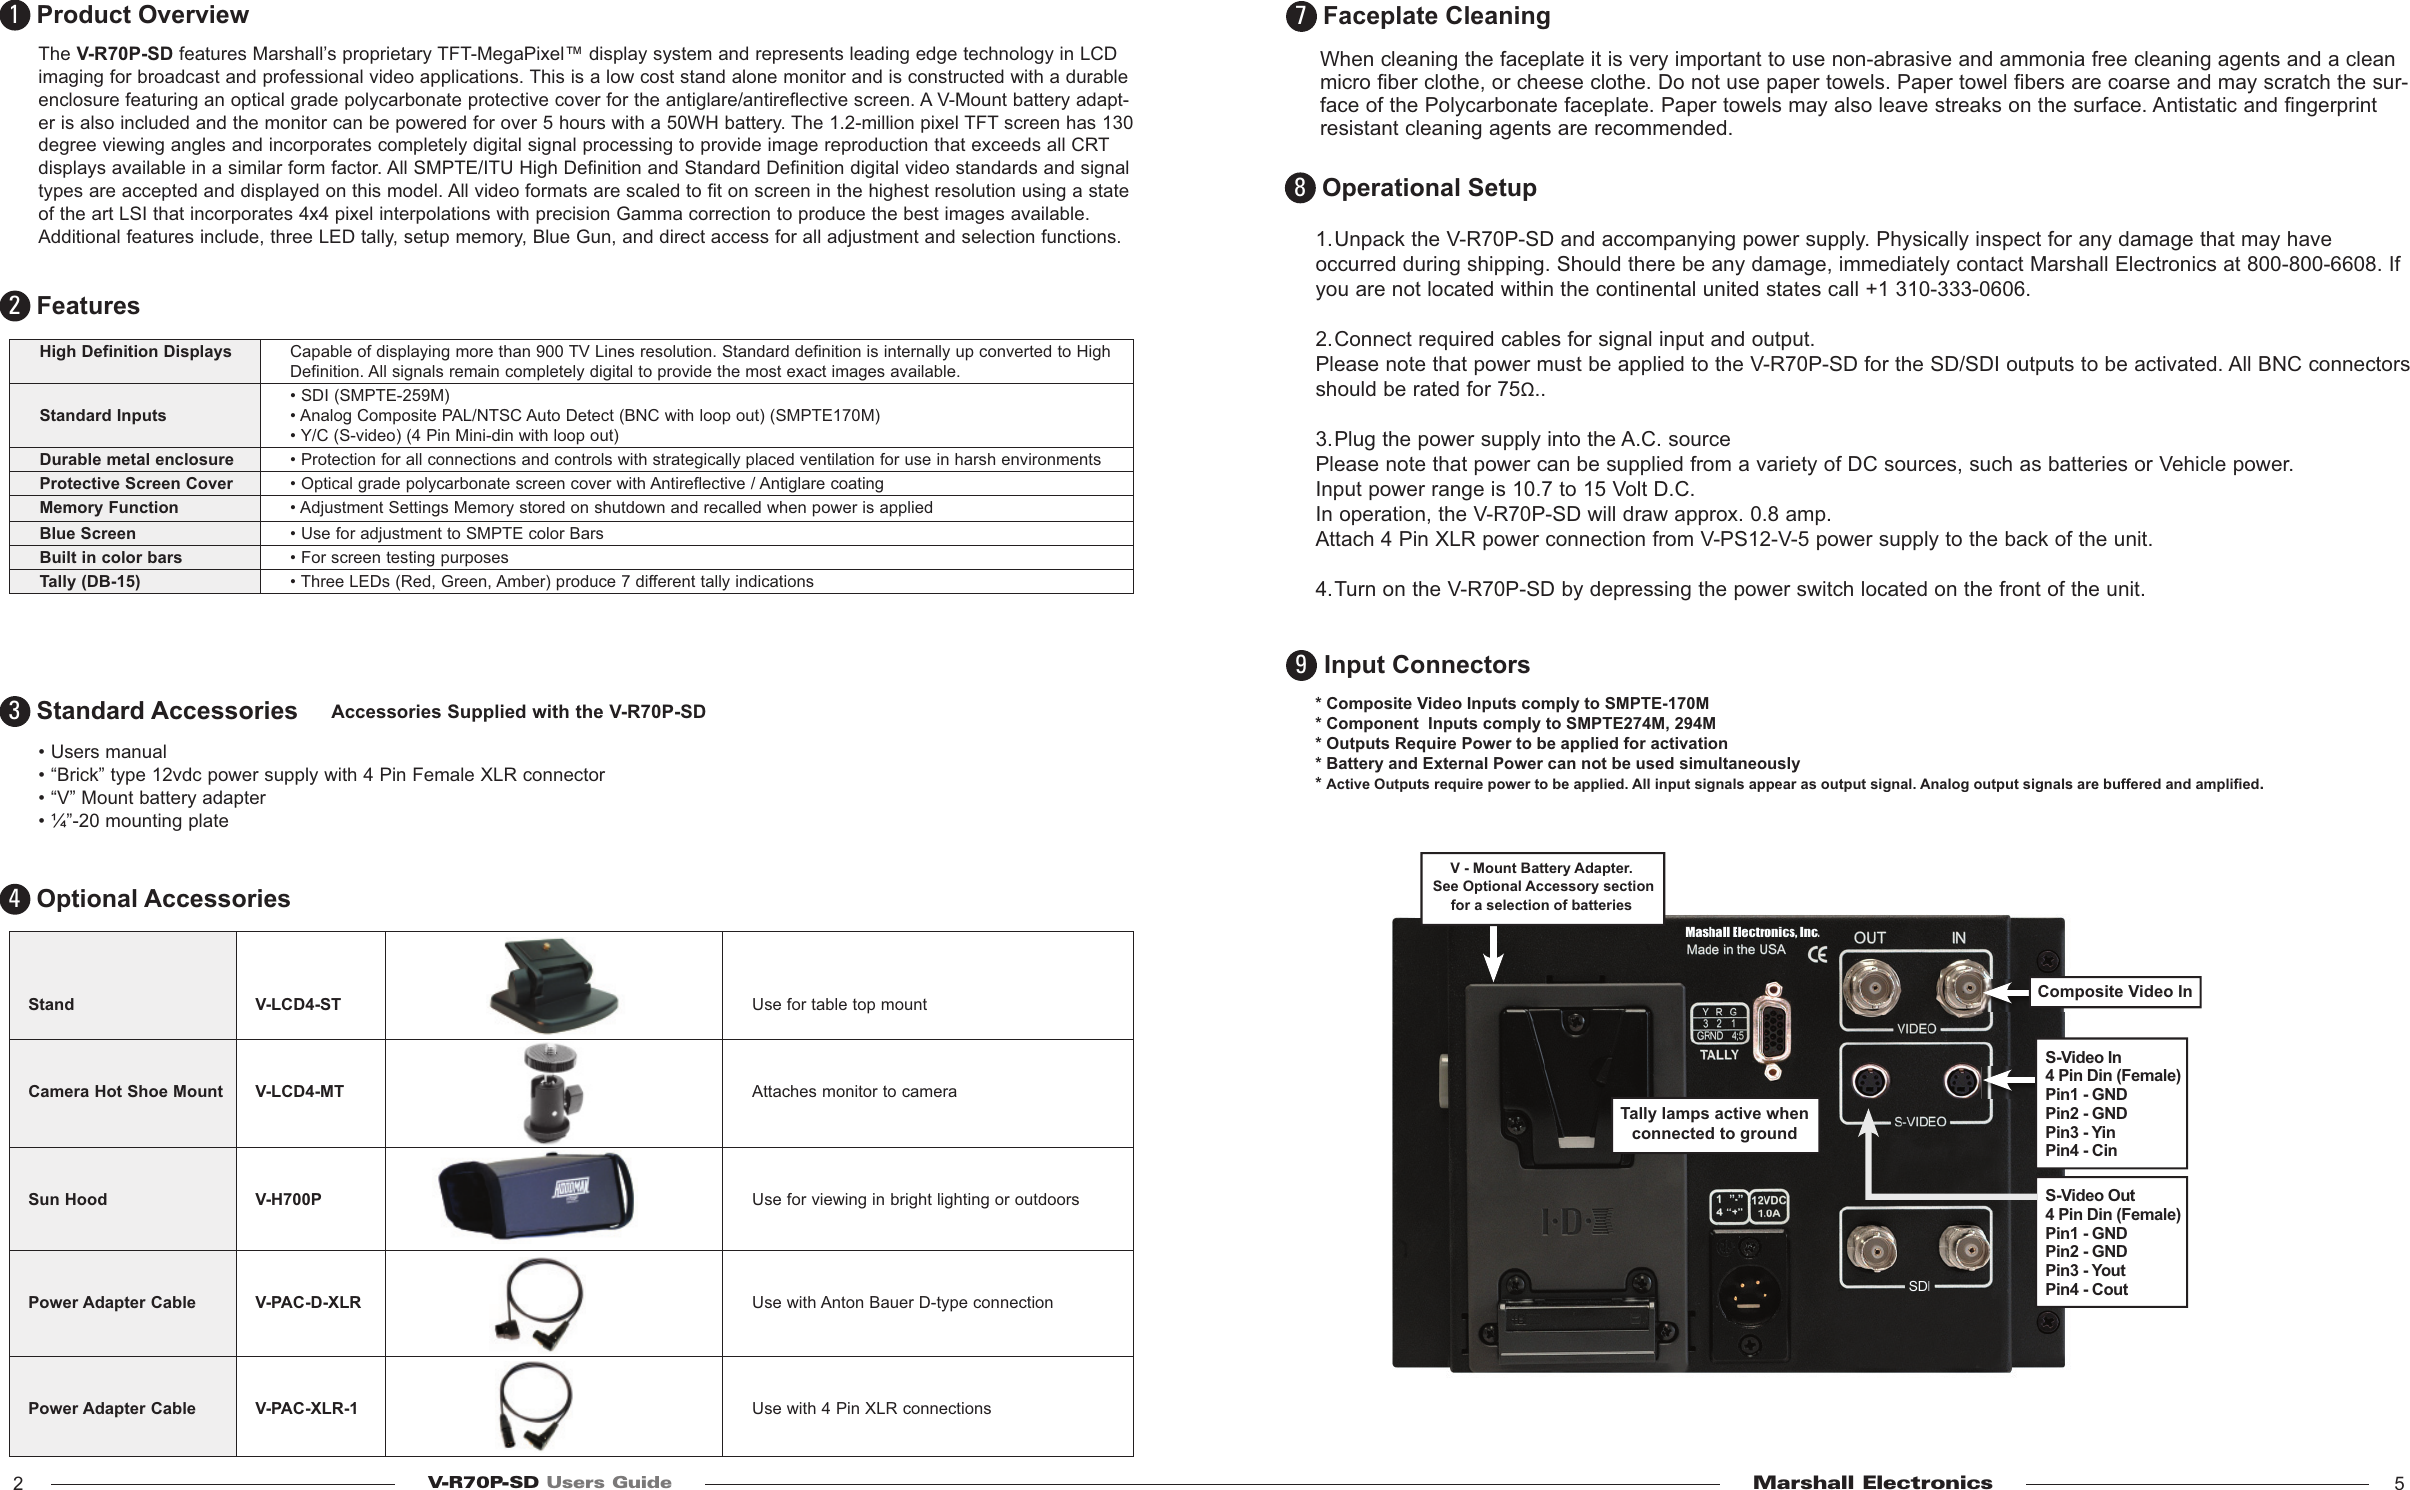 Page 2 of 6 - Marshall-Electronic Marshall-Electronic-Tft-Megapixel-Monitor-V-R70P-Sd-Users-Manual- V-R70P-SD Users Guide  Marshall-electronic-tft-megapixel-monitor-v-r70p-sd-users-manual